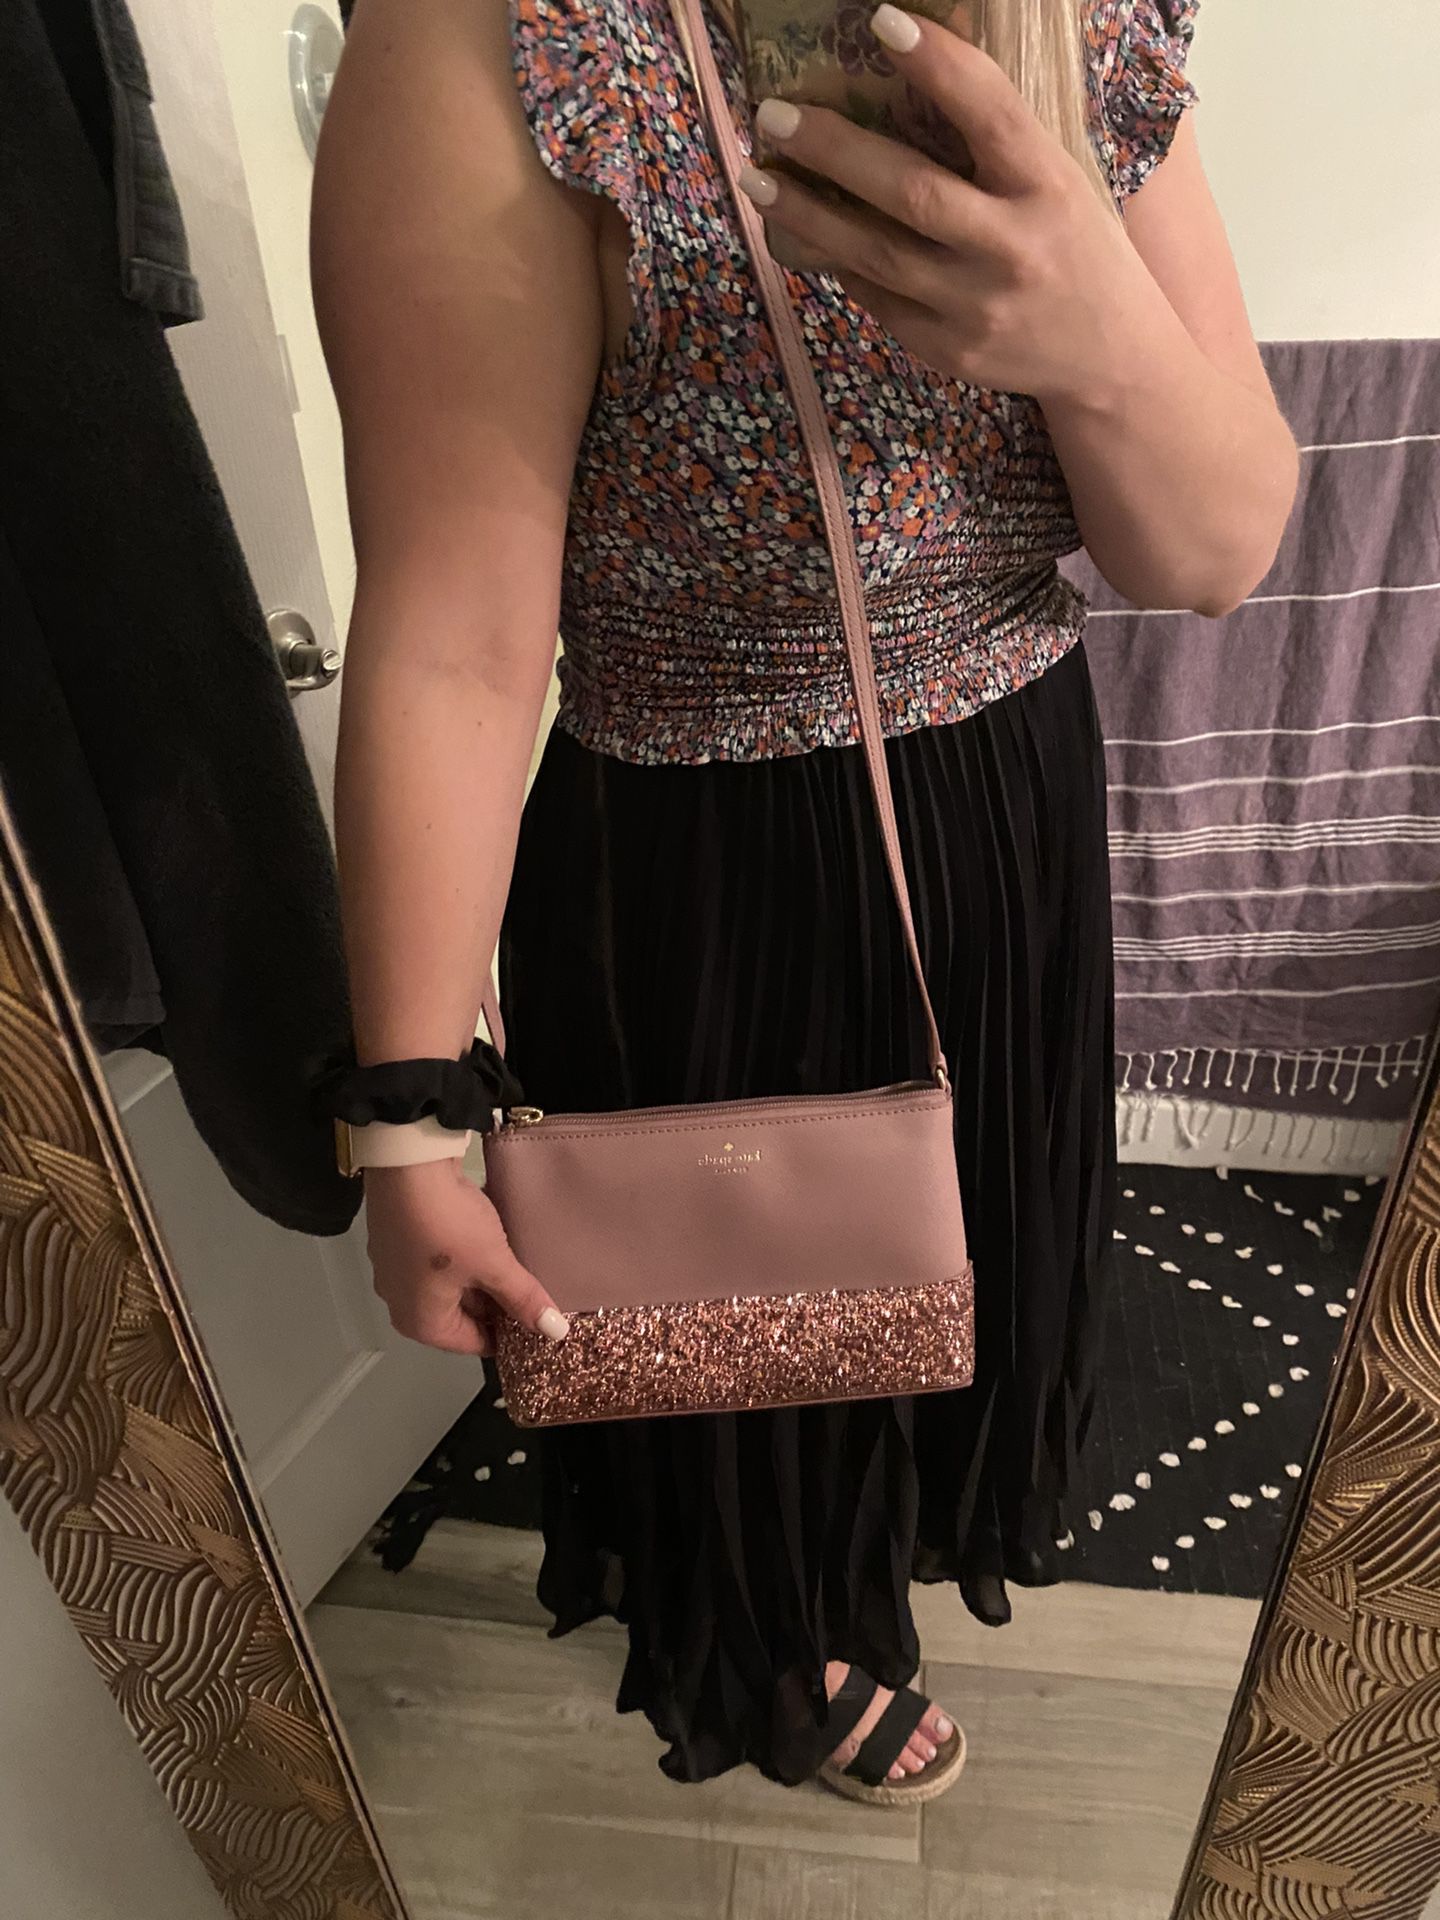 Kate Spade Carson Convertible Crossbody for Sale in Apple Valley, CA -  OfferUp